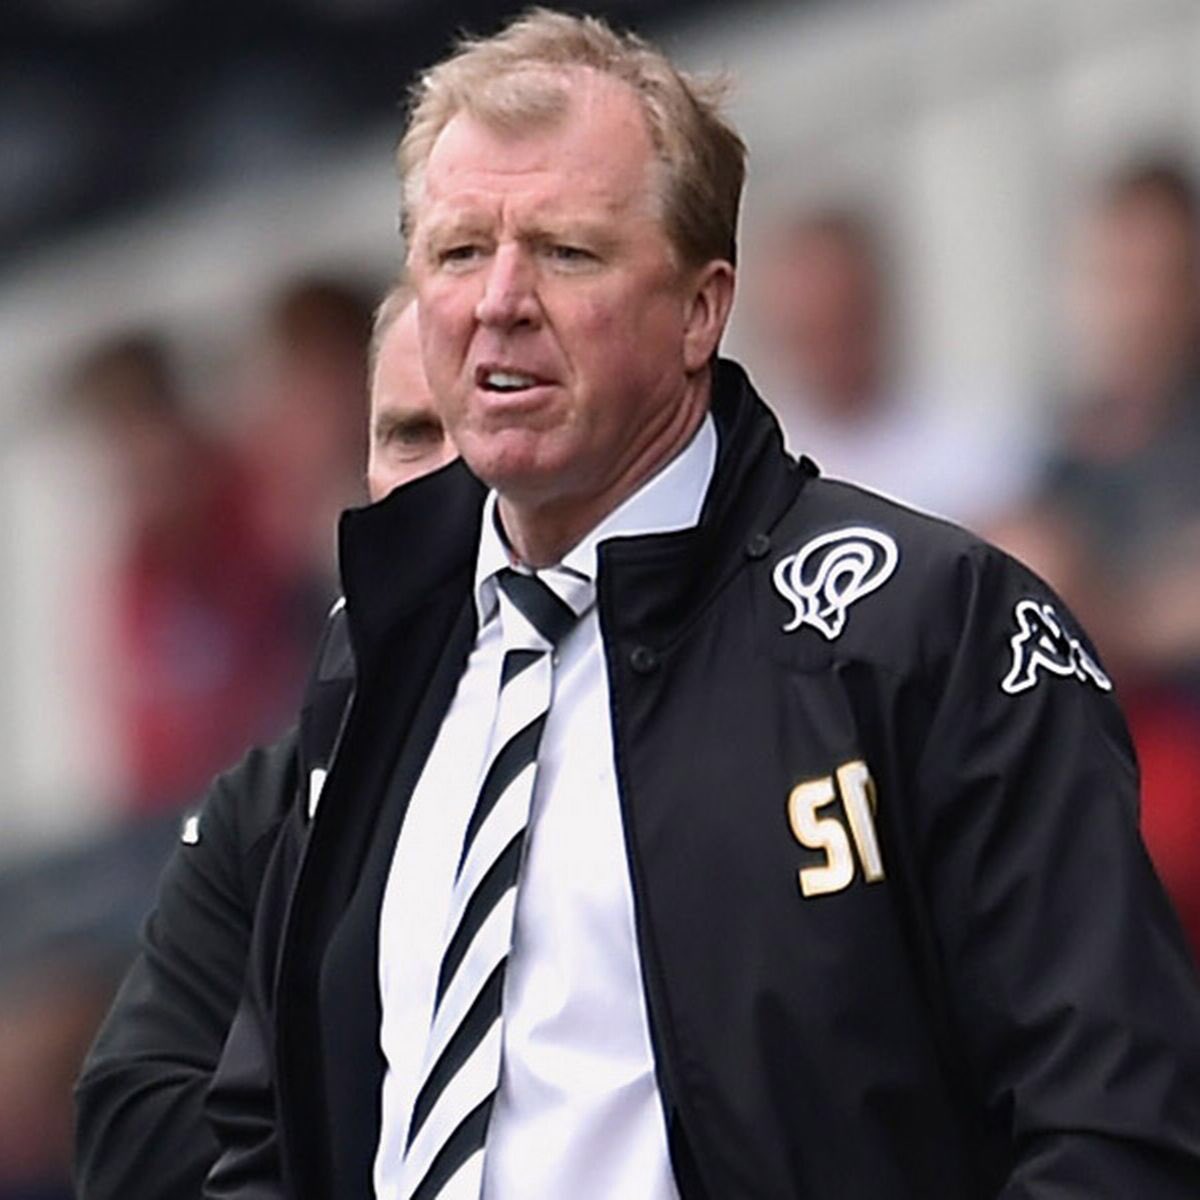 After spending most of the season in the top two...Derby end up needing a point on the last day to stay in the playoffs.They lose 3-0 to Reading and Steve McClaren is sacked.